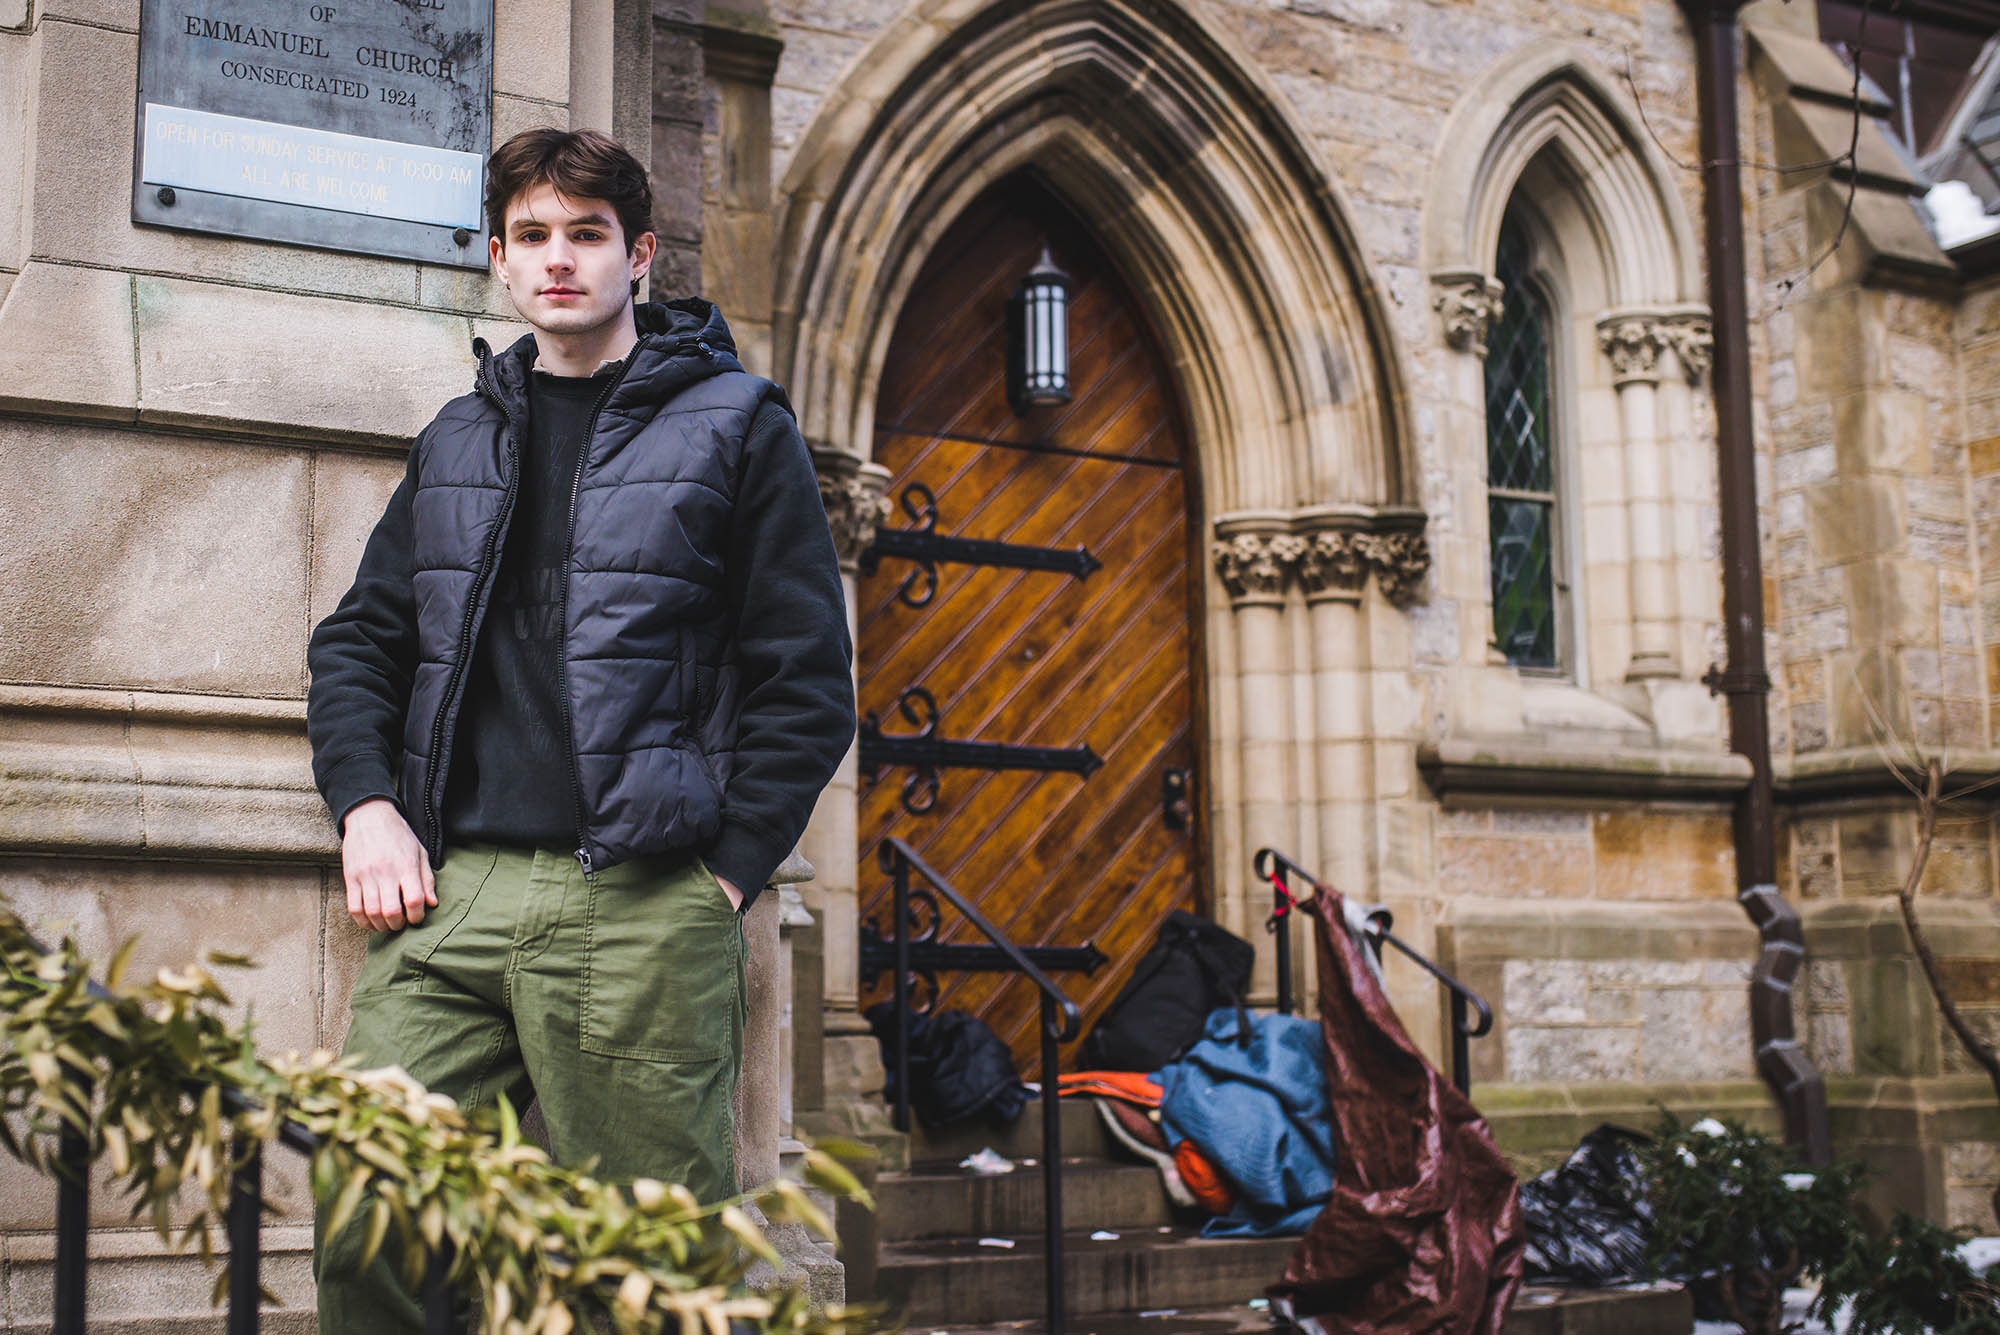 Photo: Food for Thought founder Ben Myers (CGS’22, CAS’24) outside Emmanuel Church, a day shelter on Newbury Street where he films his videos. A young white man with dark brown hair stands with hands in pockets in front of a church with large wooden doors. He wears a black hooded sweatshirt, dark grey puffer vest, and olive green cargo pants. An unhoused person's belongings can be seen scattered in front of the entrance of the church.